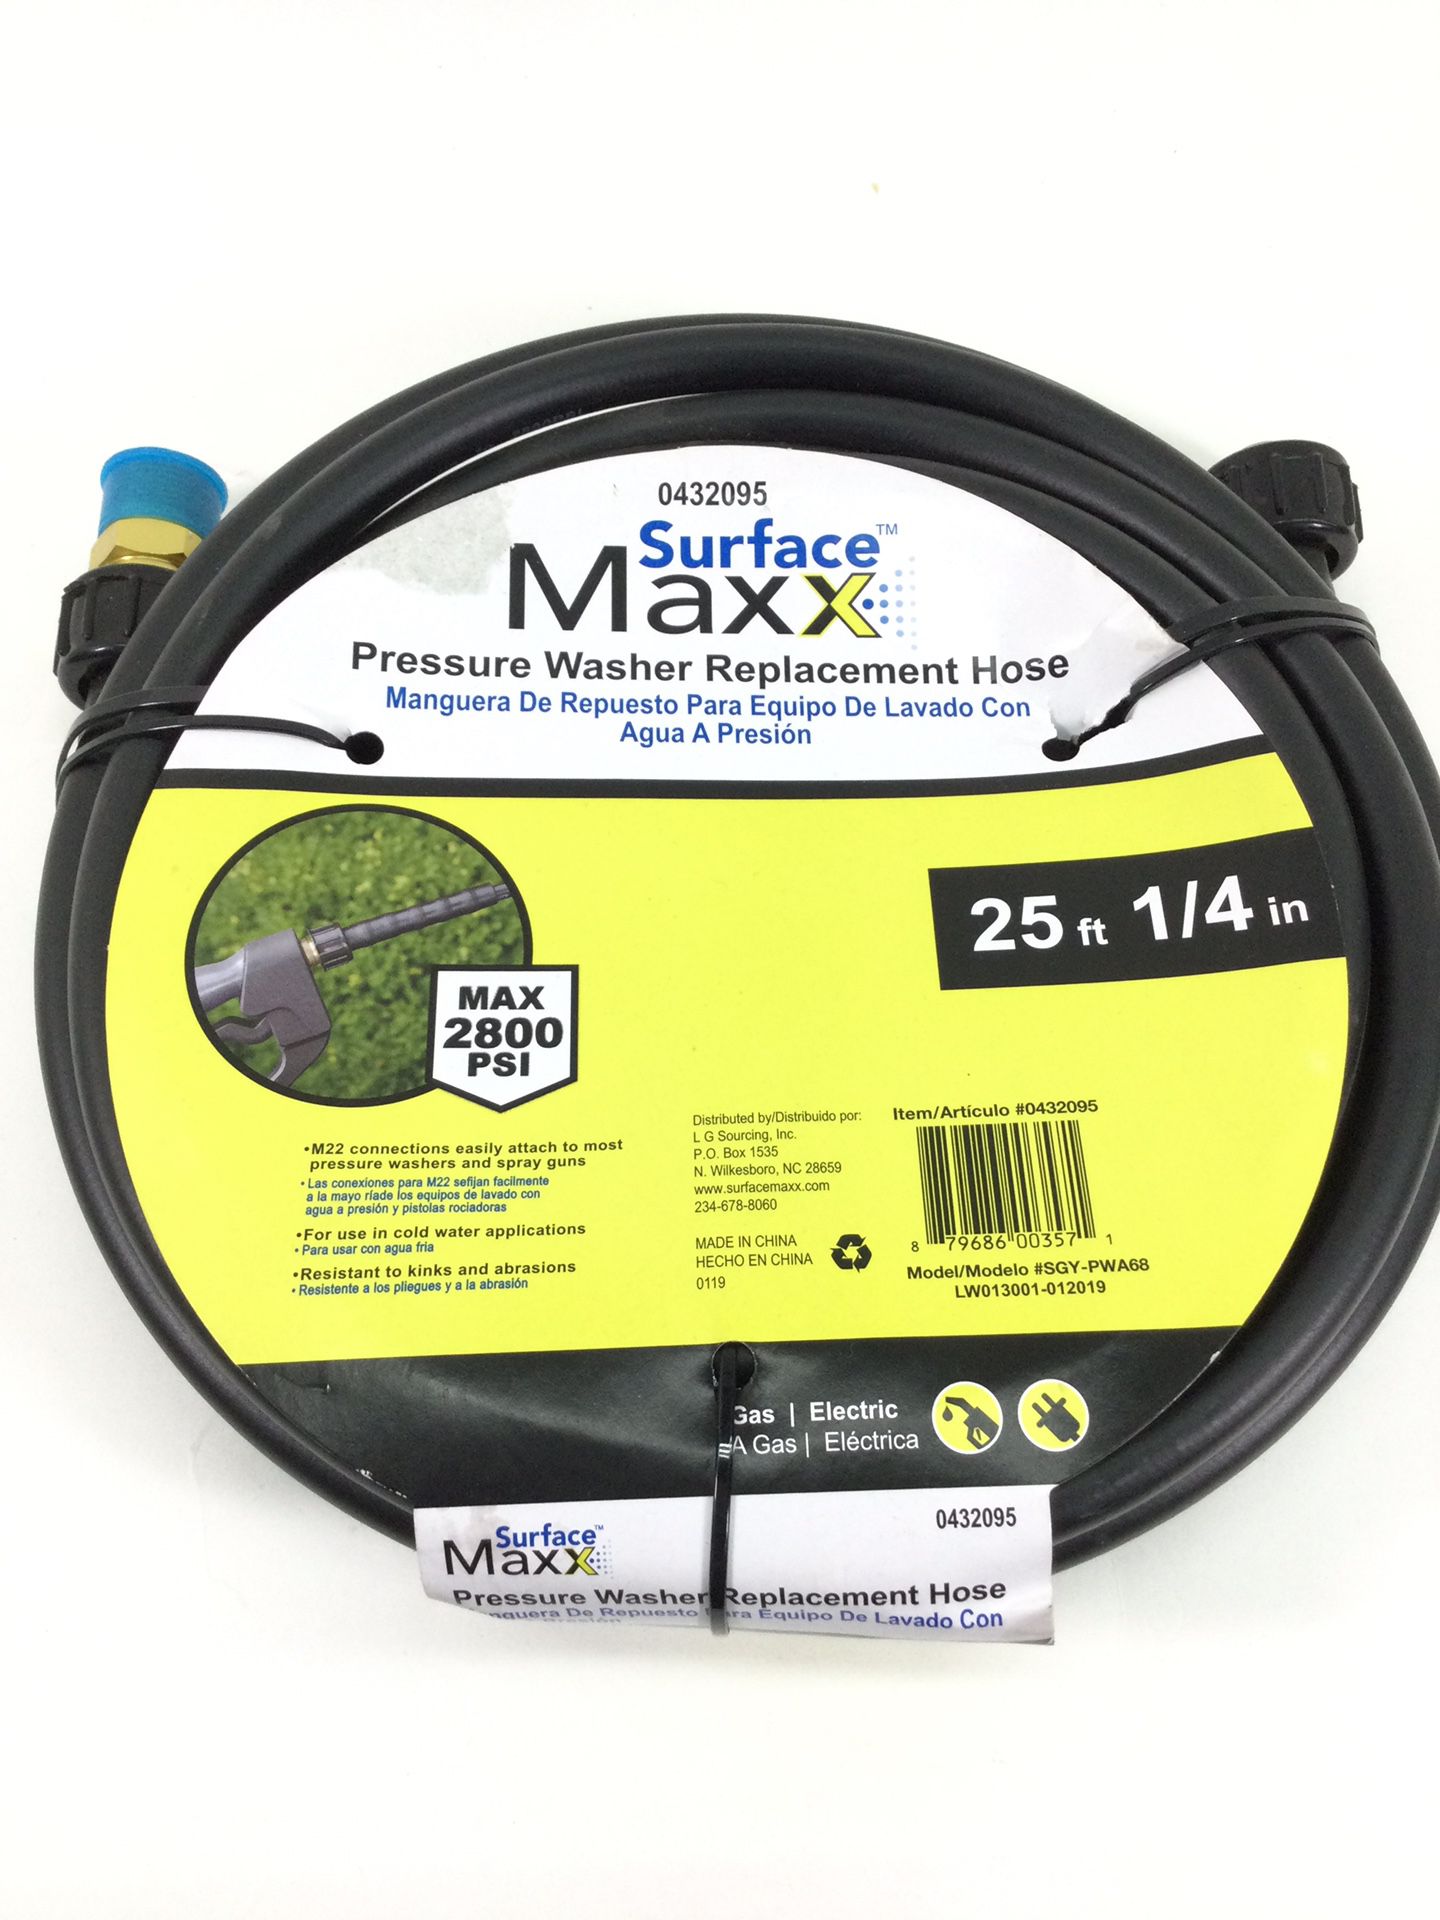 *NEW* Surface Max Pressure Washer Replacement 25ft 1/4in Hose